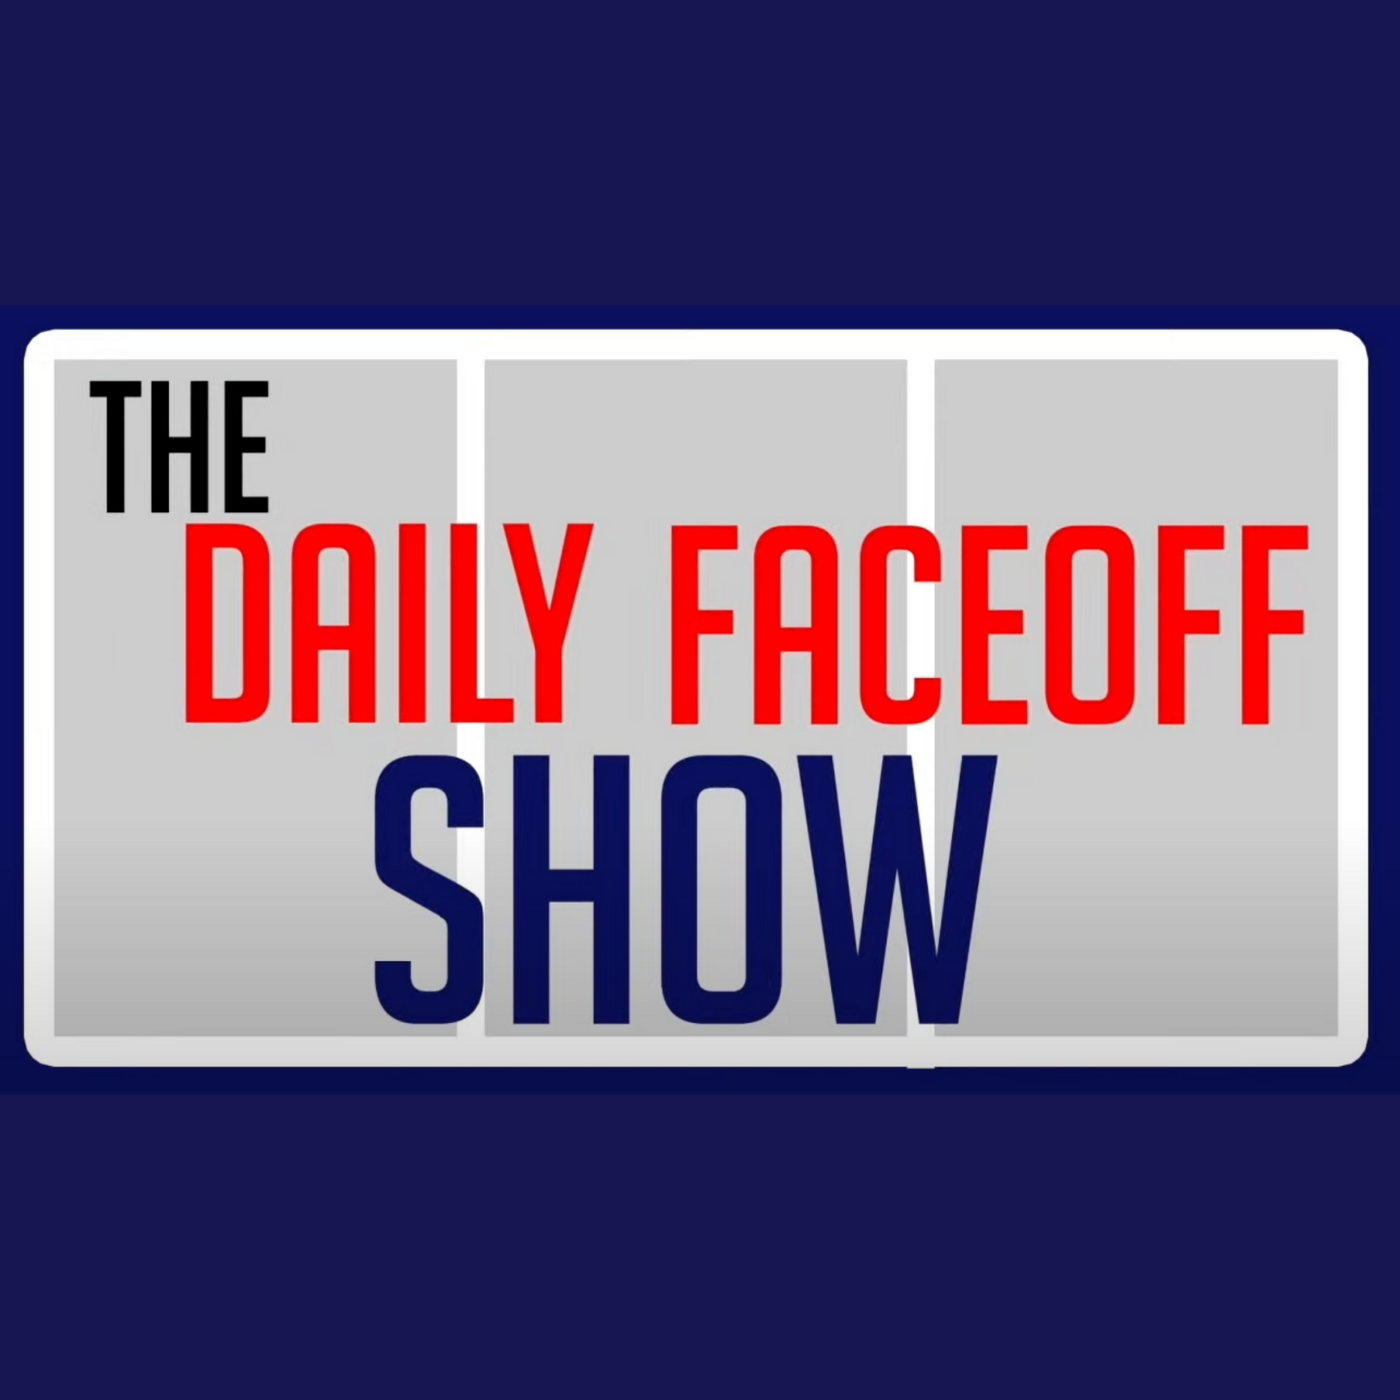 June 16th - The Daily Faceoff Show - Feat. Frank Seravalli, Mike McKenna & Stephen Whyno